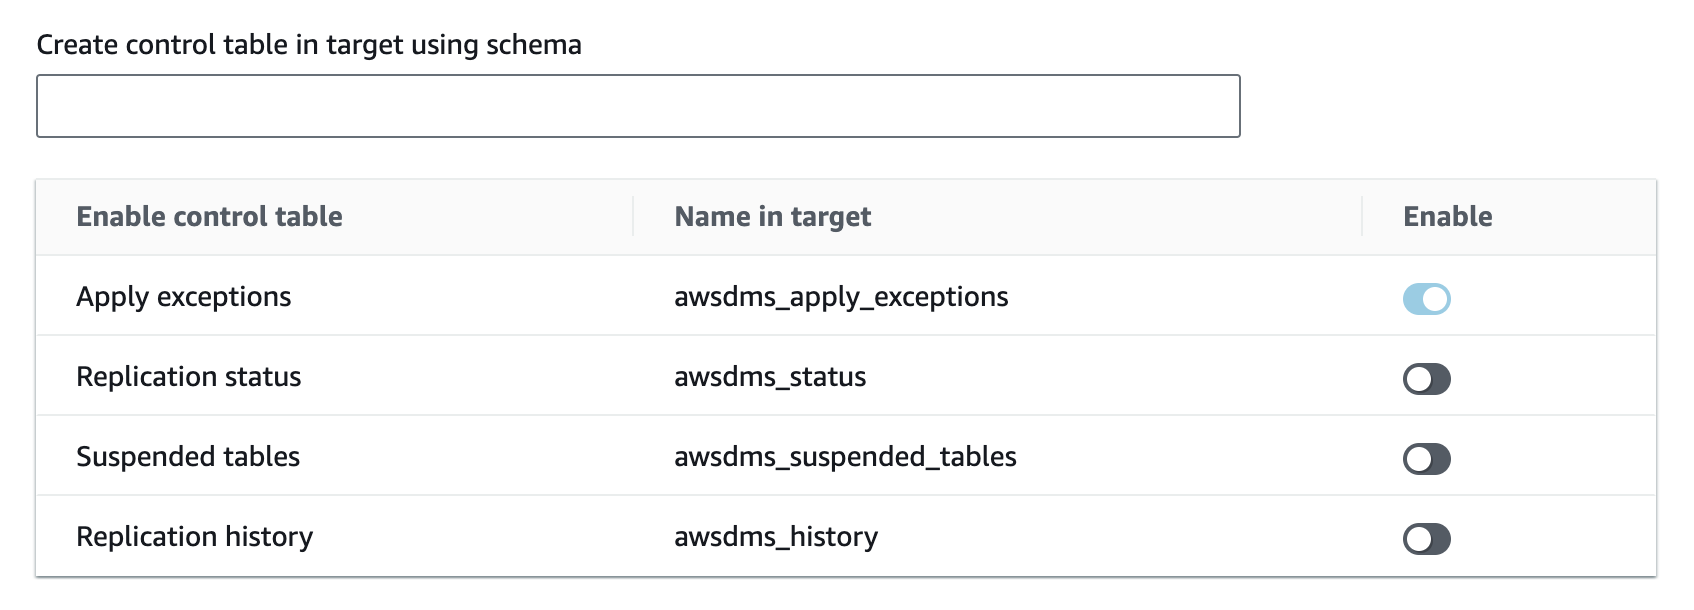 Create control table in target using schema